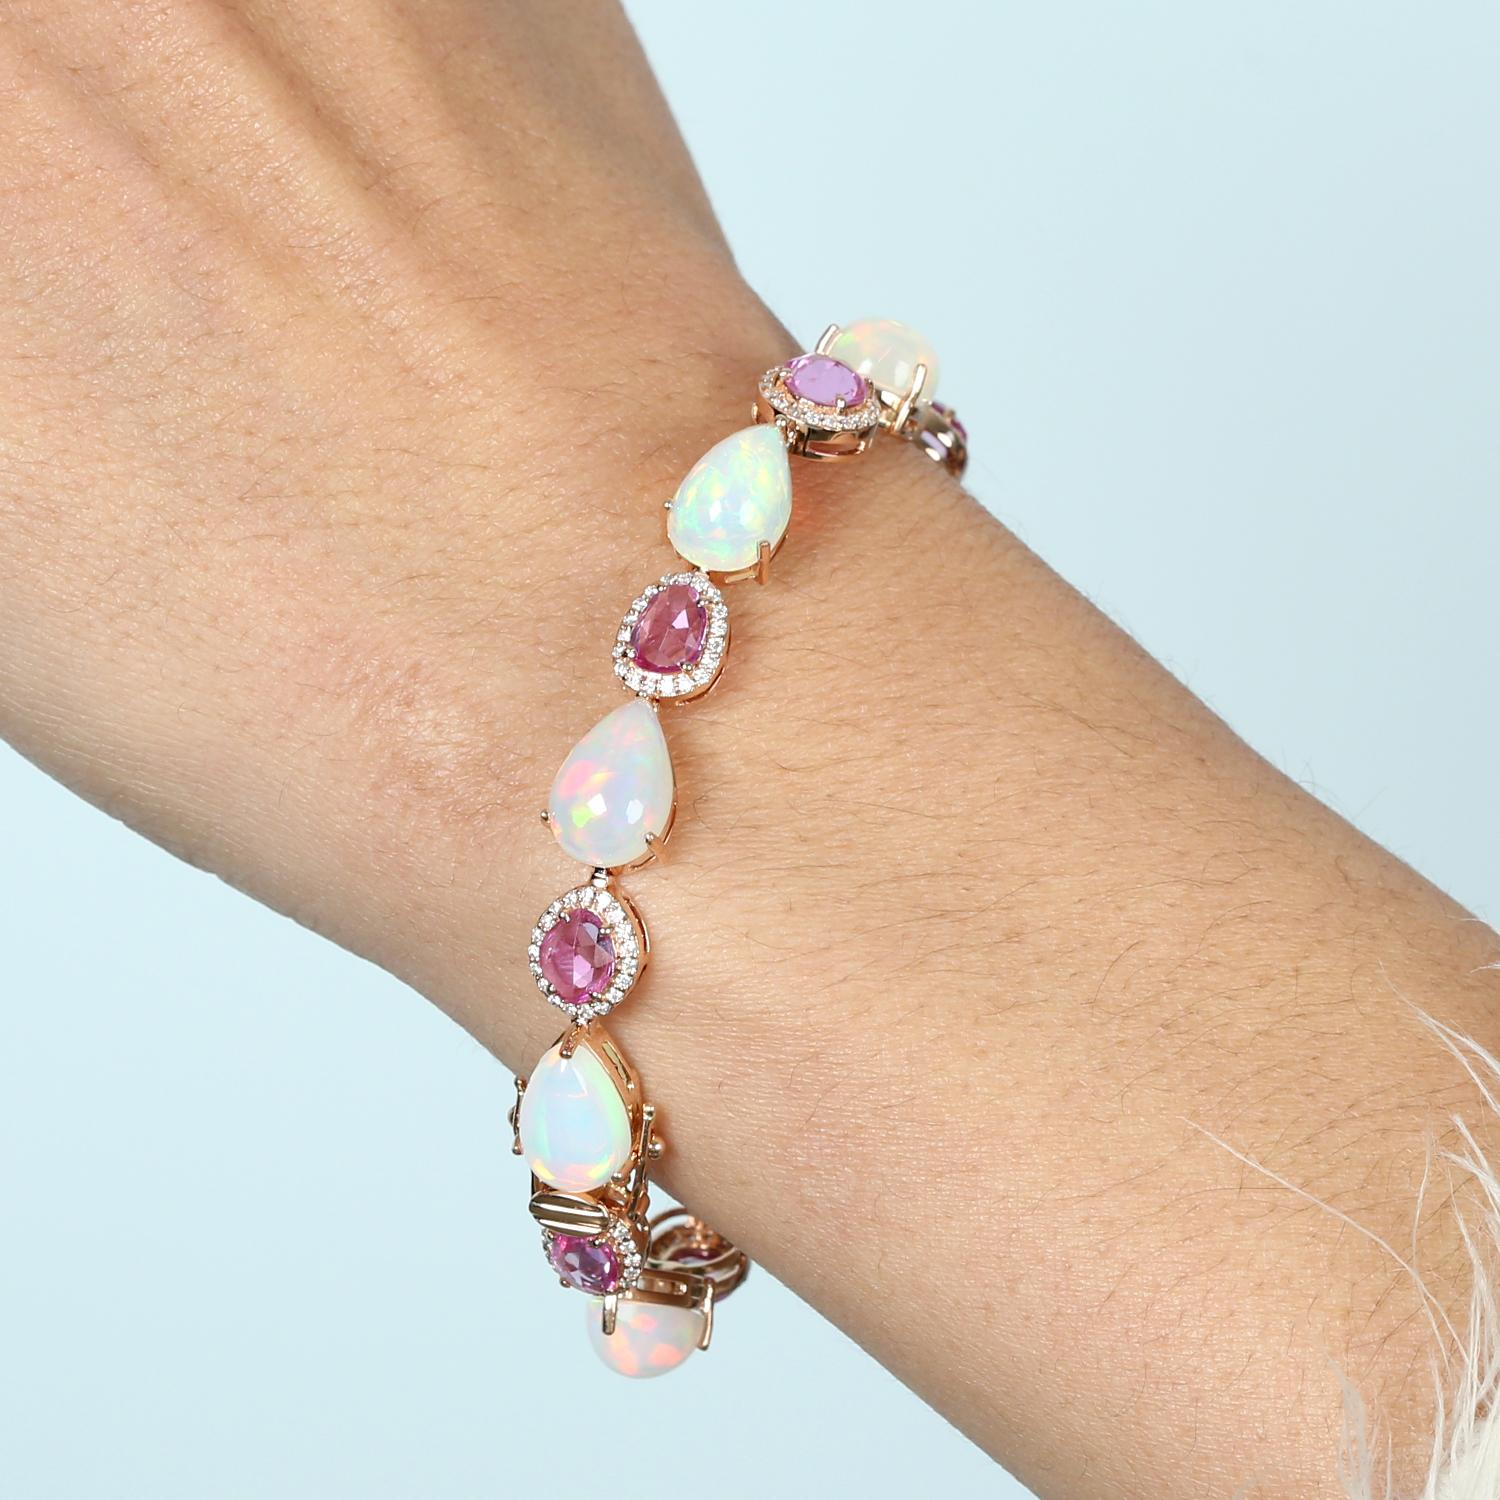 Contemporary 17.58ct Opal & Sapphire Bracelet With Diamonds Made In 18k Gold For Sale